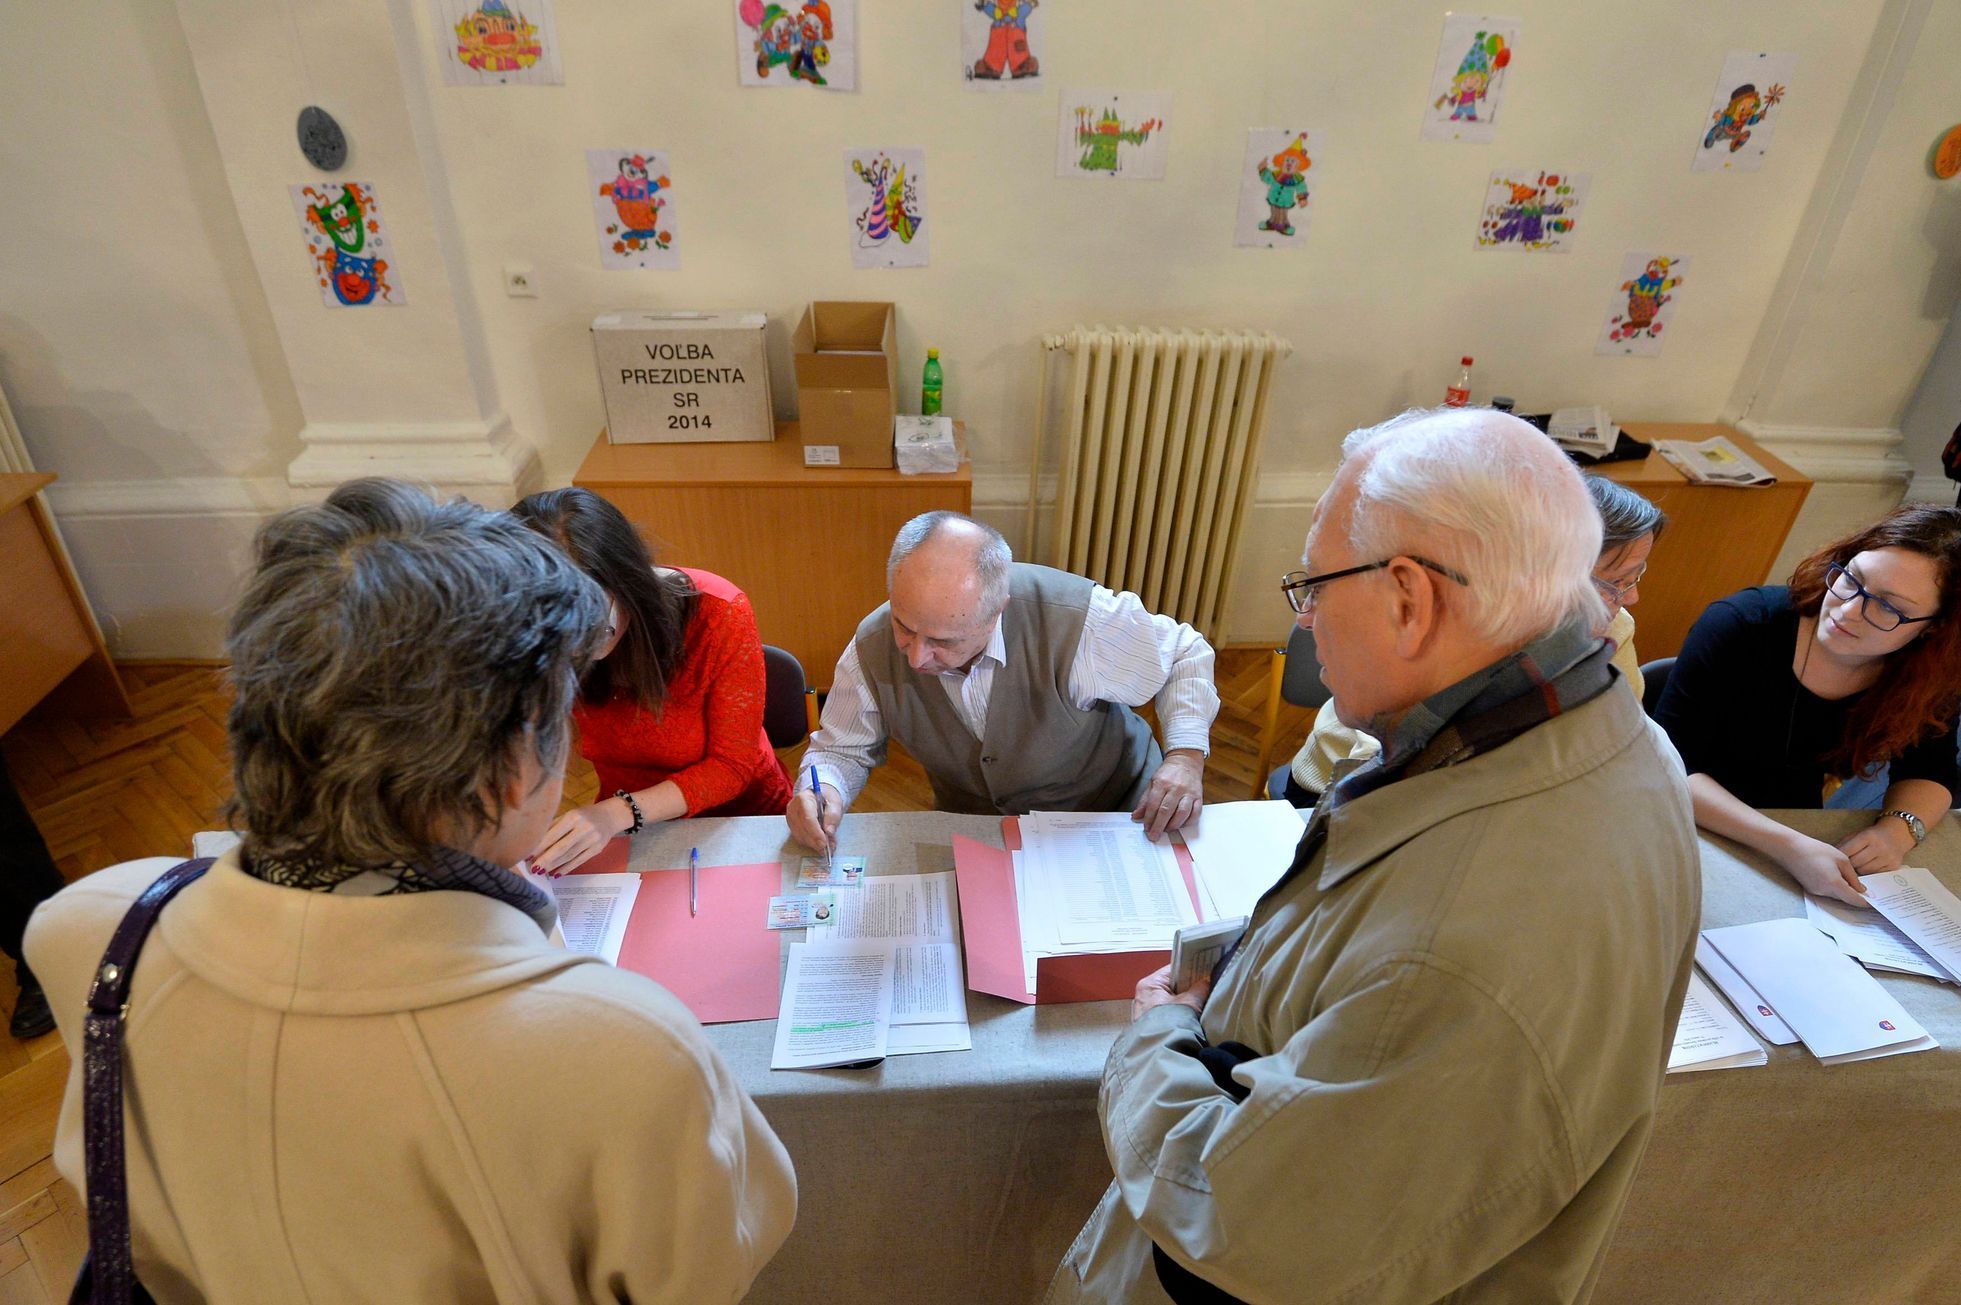 Members of an election committee prepare ballots for voters at a polling station during the first round presidential elections in Bratislava